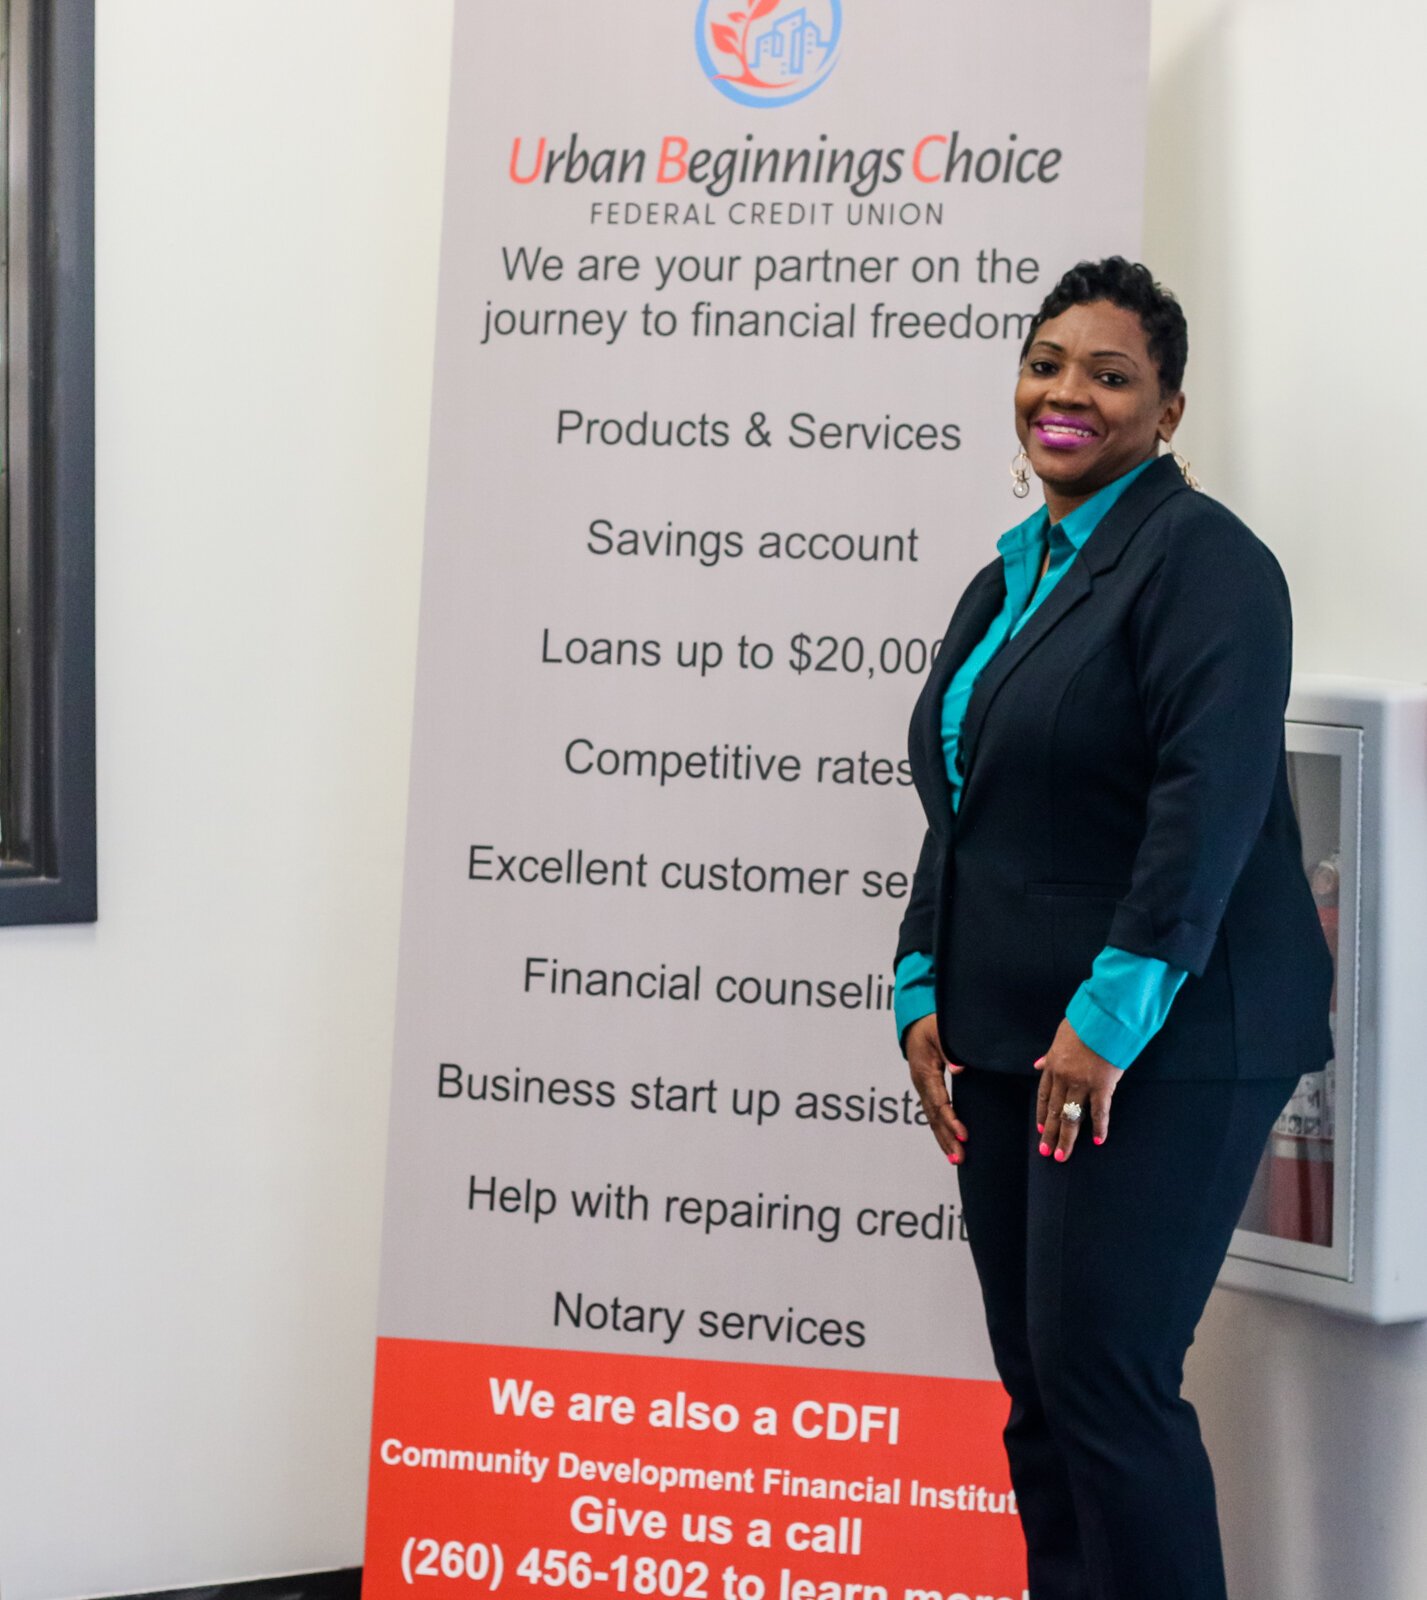 Urban Beginnings Choice Federal Credit Union is a certified CDFI. Chief Executive Officer Diane Starks is part of a small team serving more than 265 members.